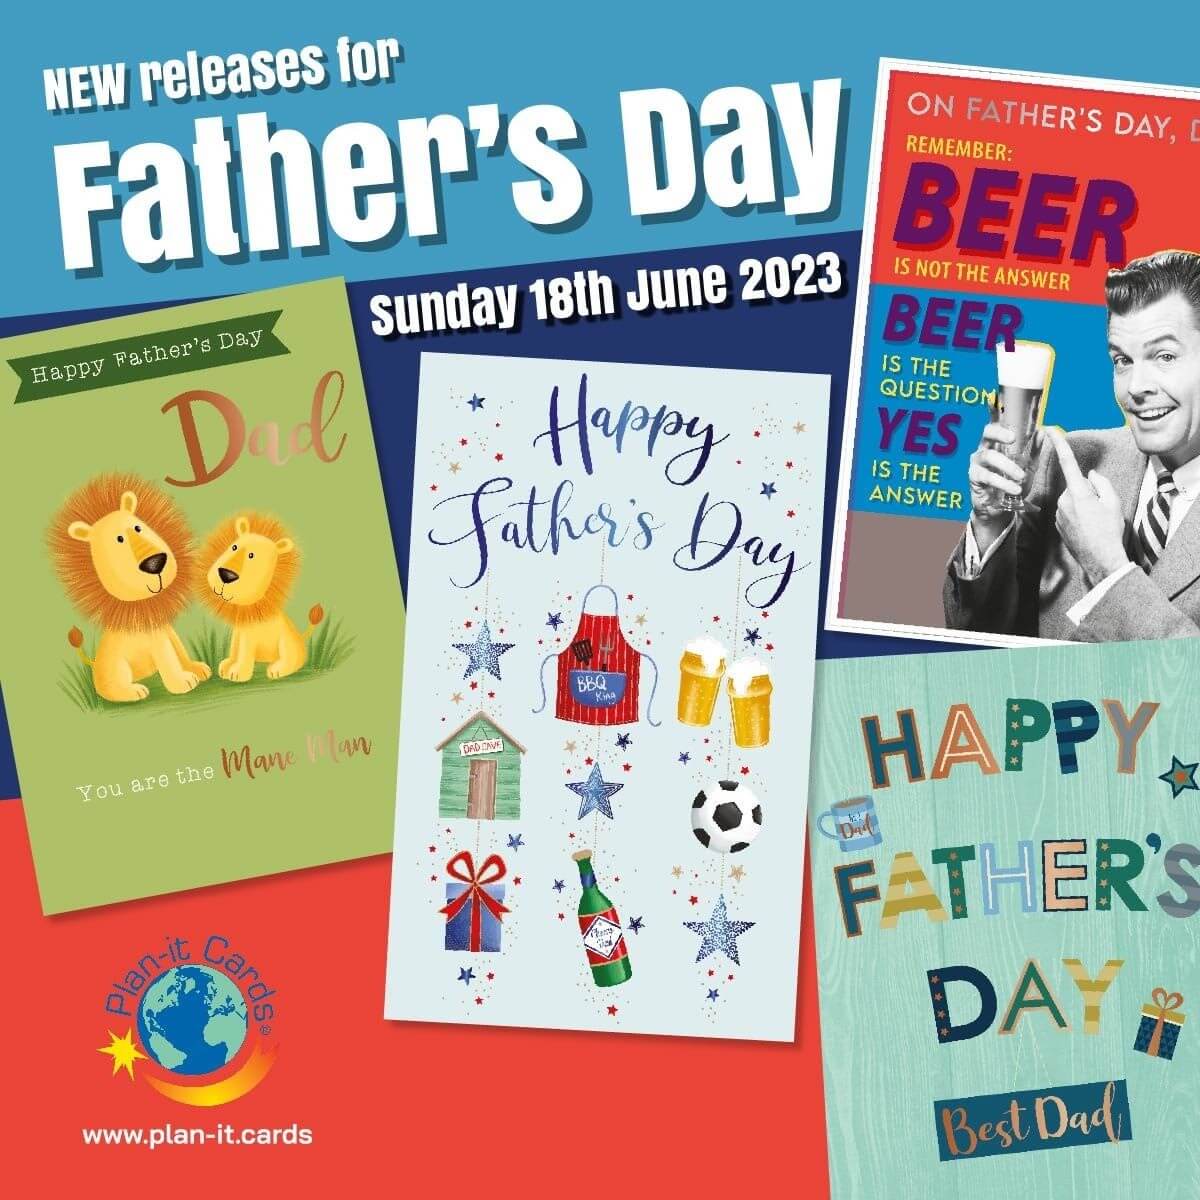 plan-it-cards-fathers-day.jpg